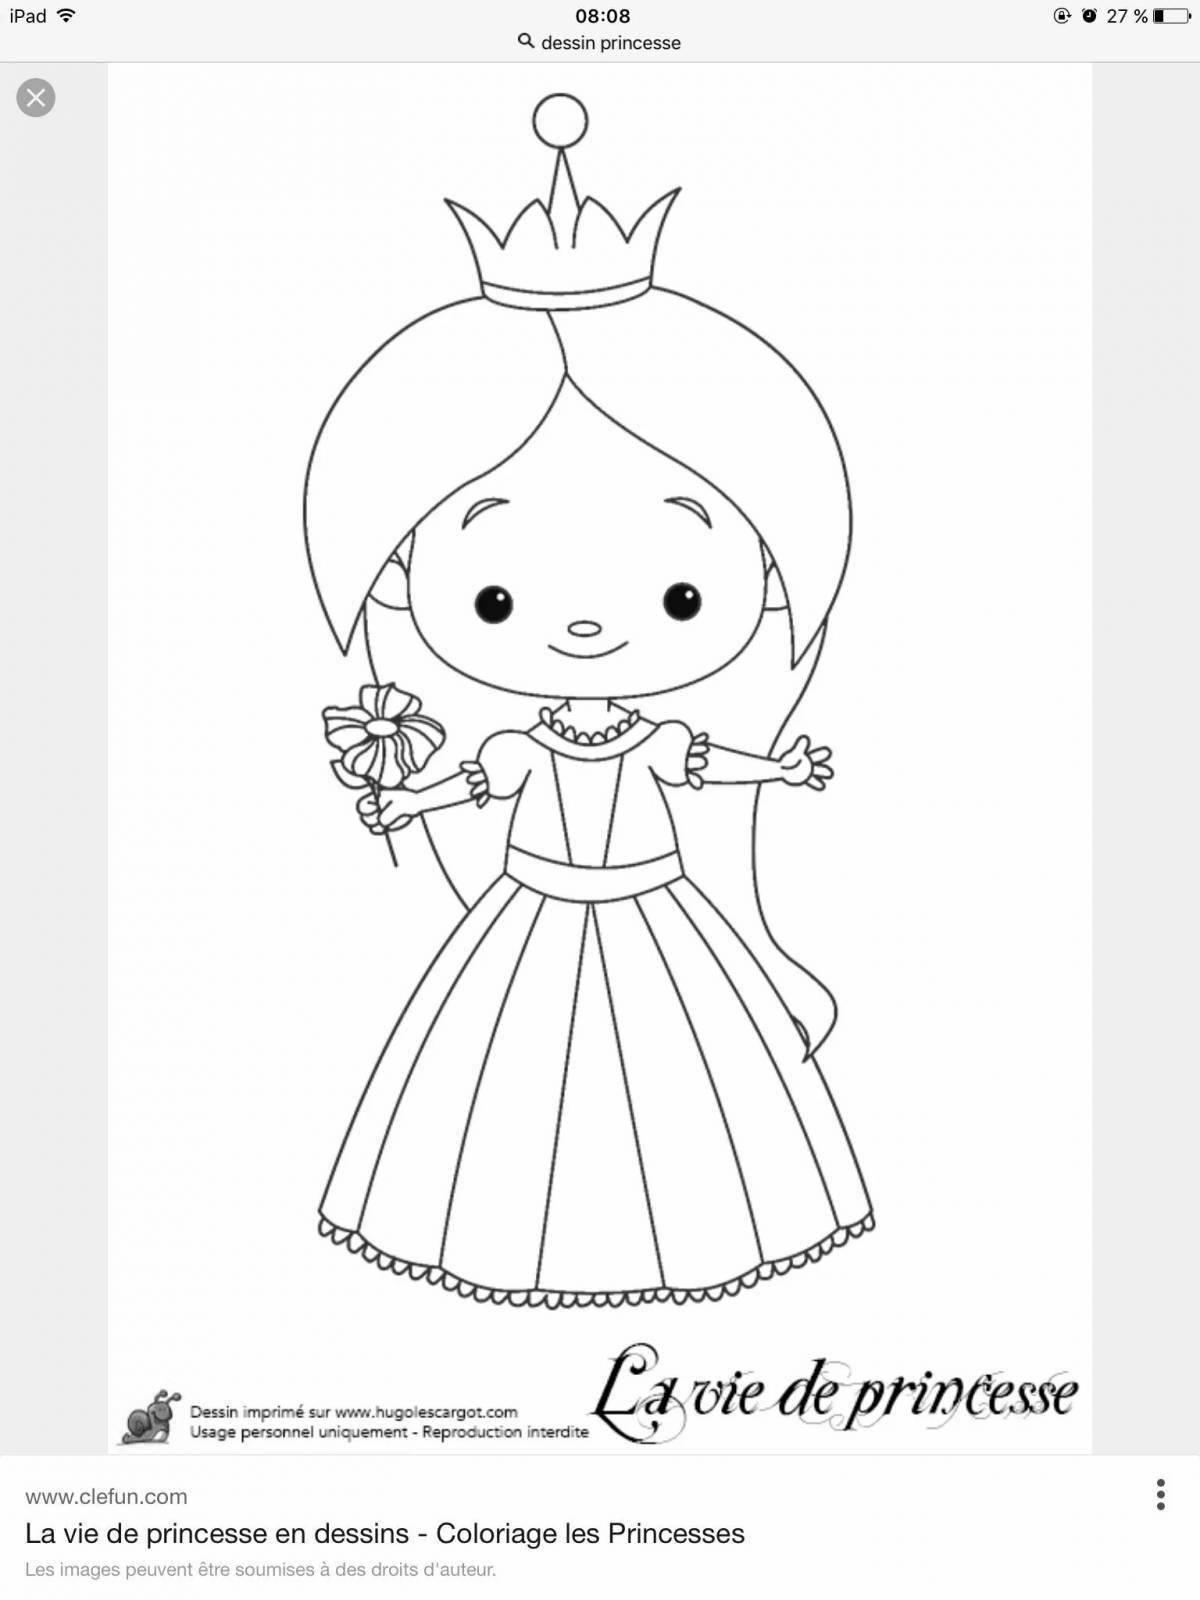 Beautiful coloring pages of princesses 4-5 years old